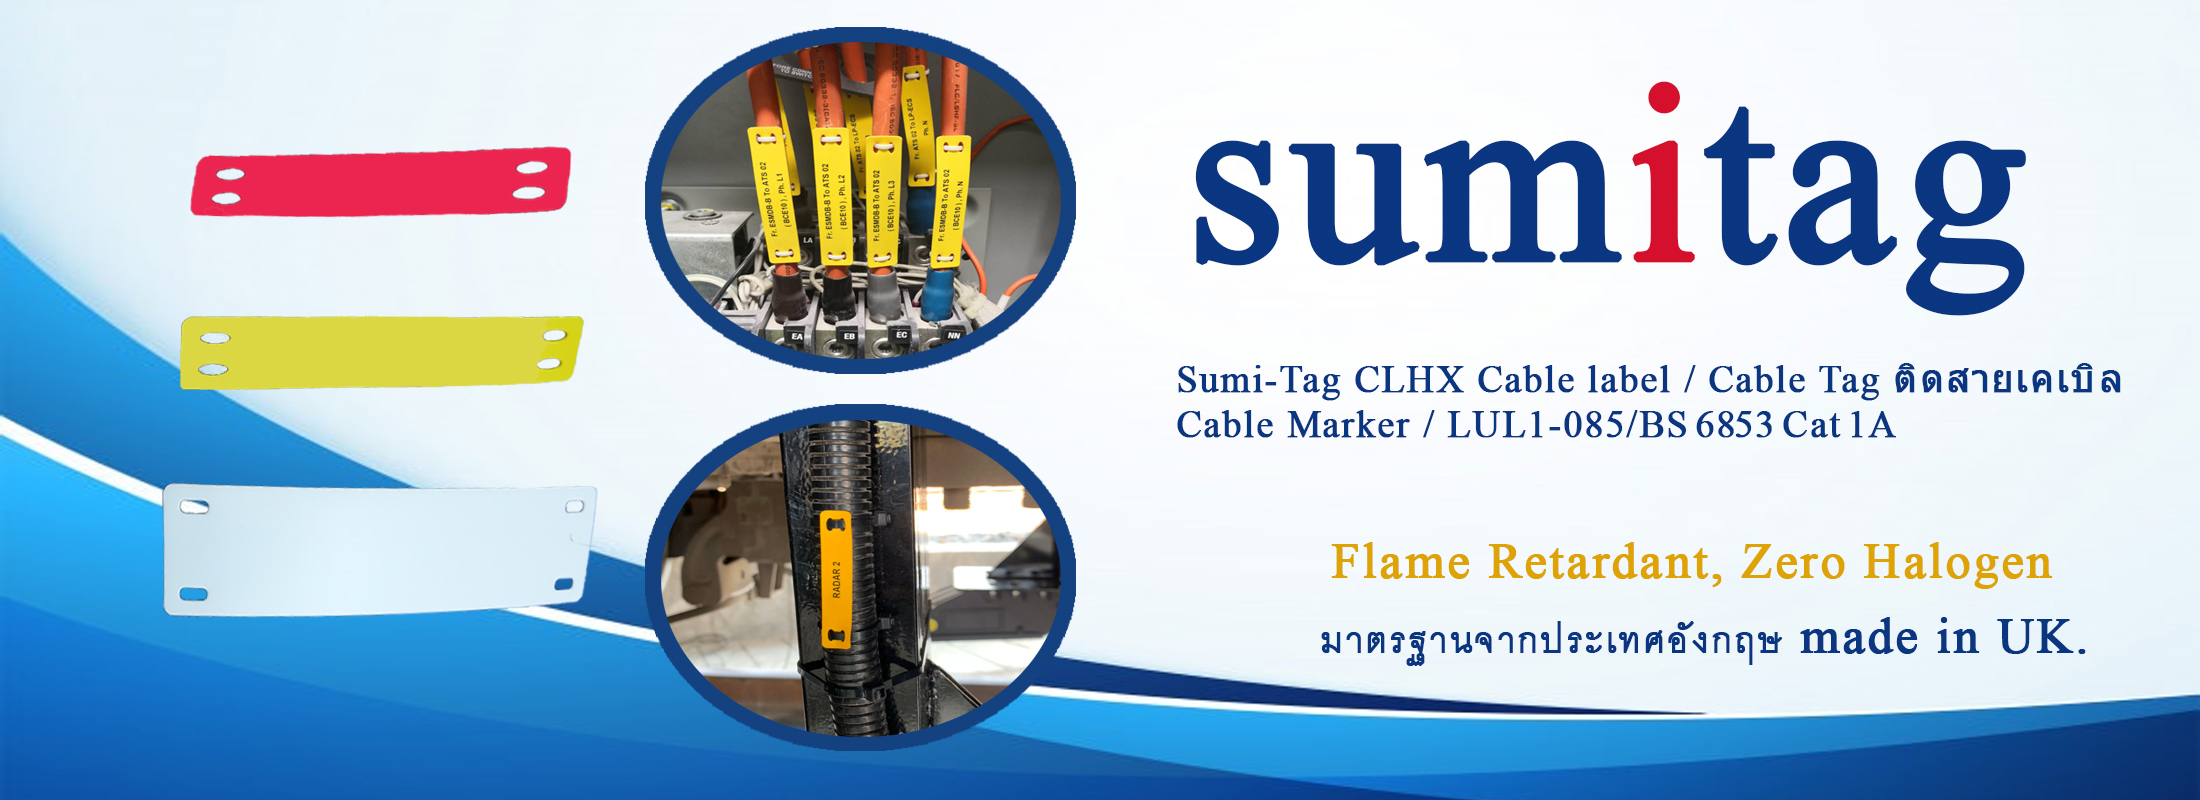 sumitag cable label banner